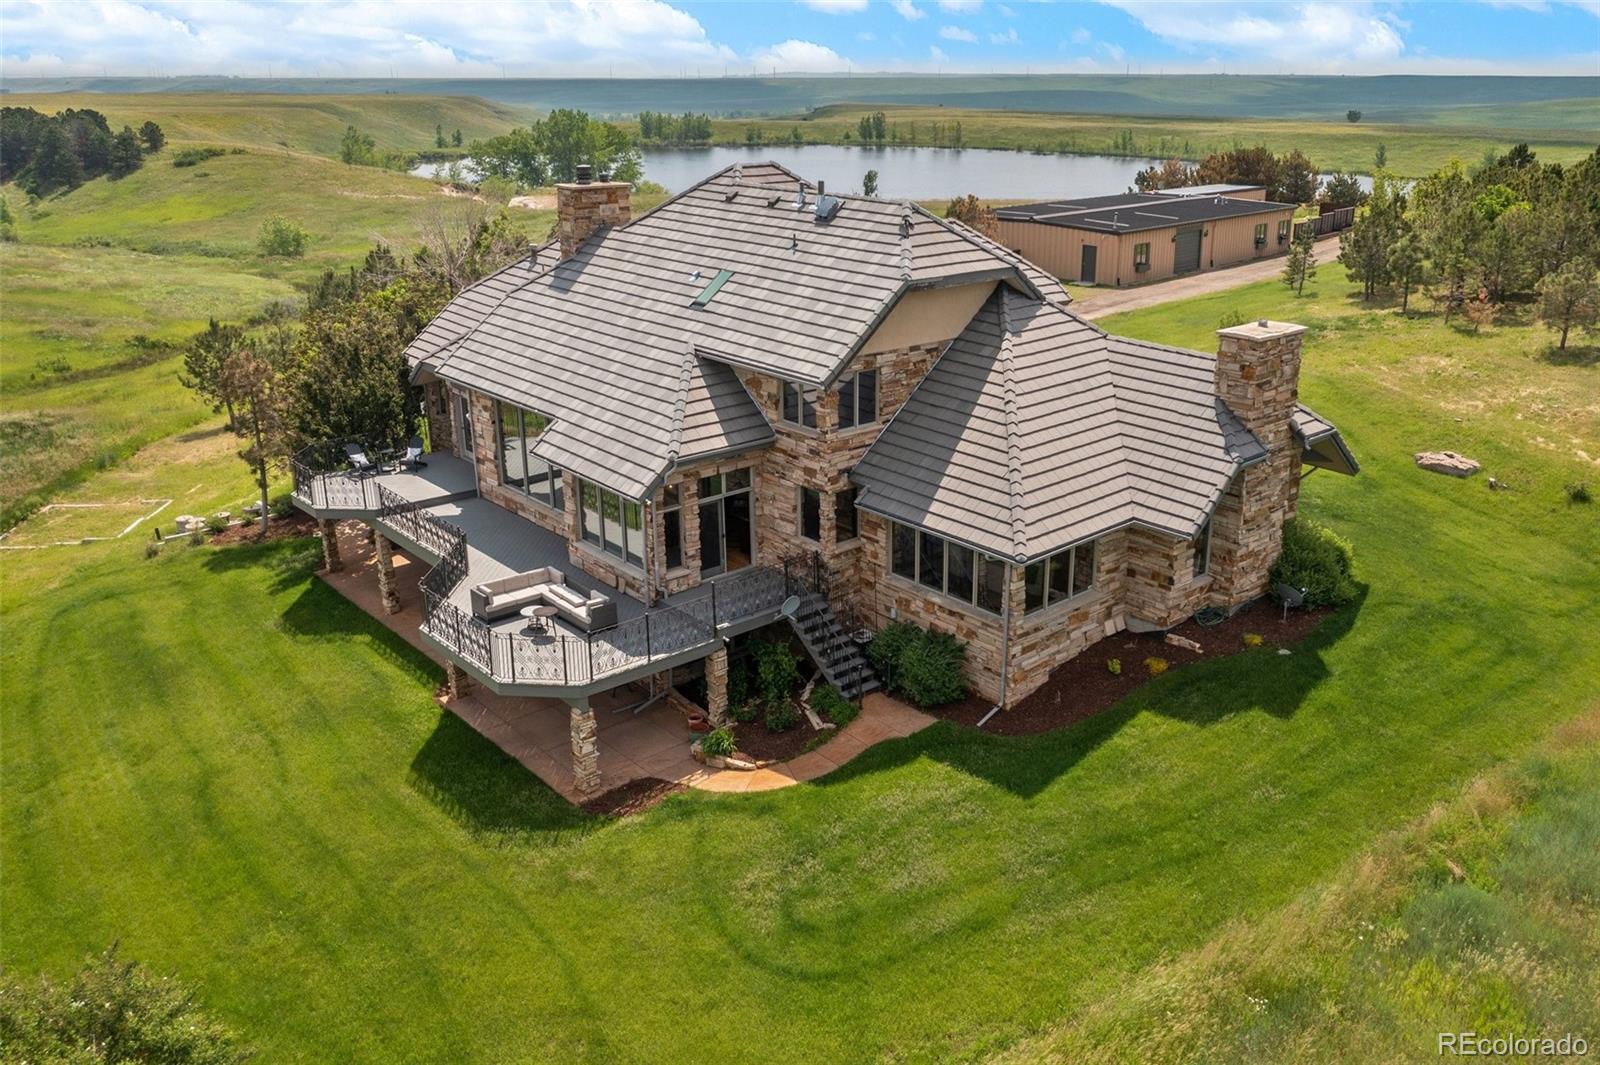 162+ acres surrounded by conserved lands and spectacular front range Flatiron views.